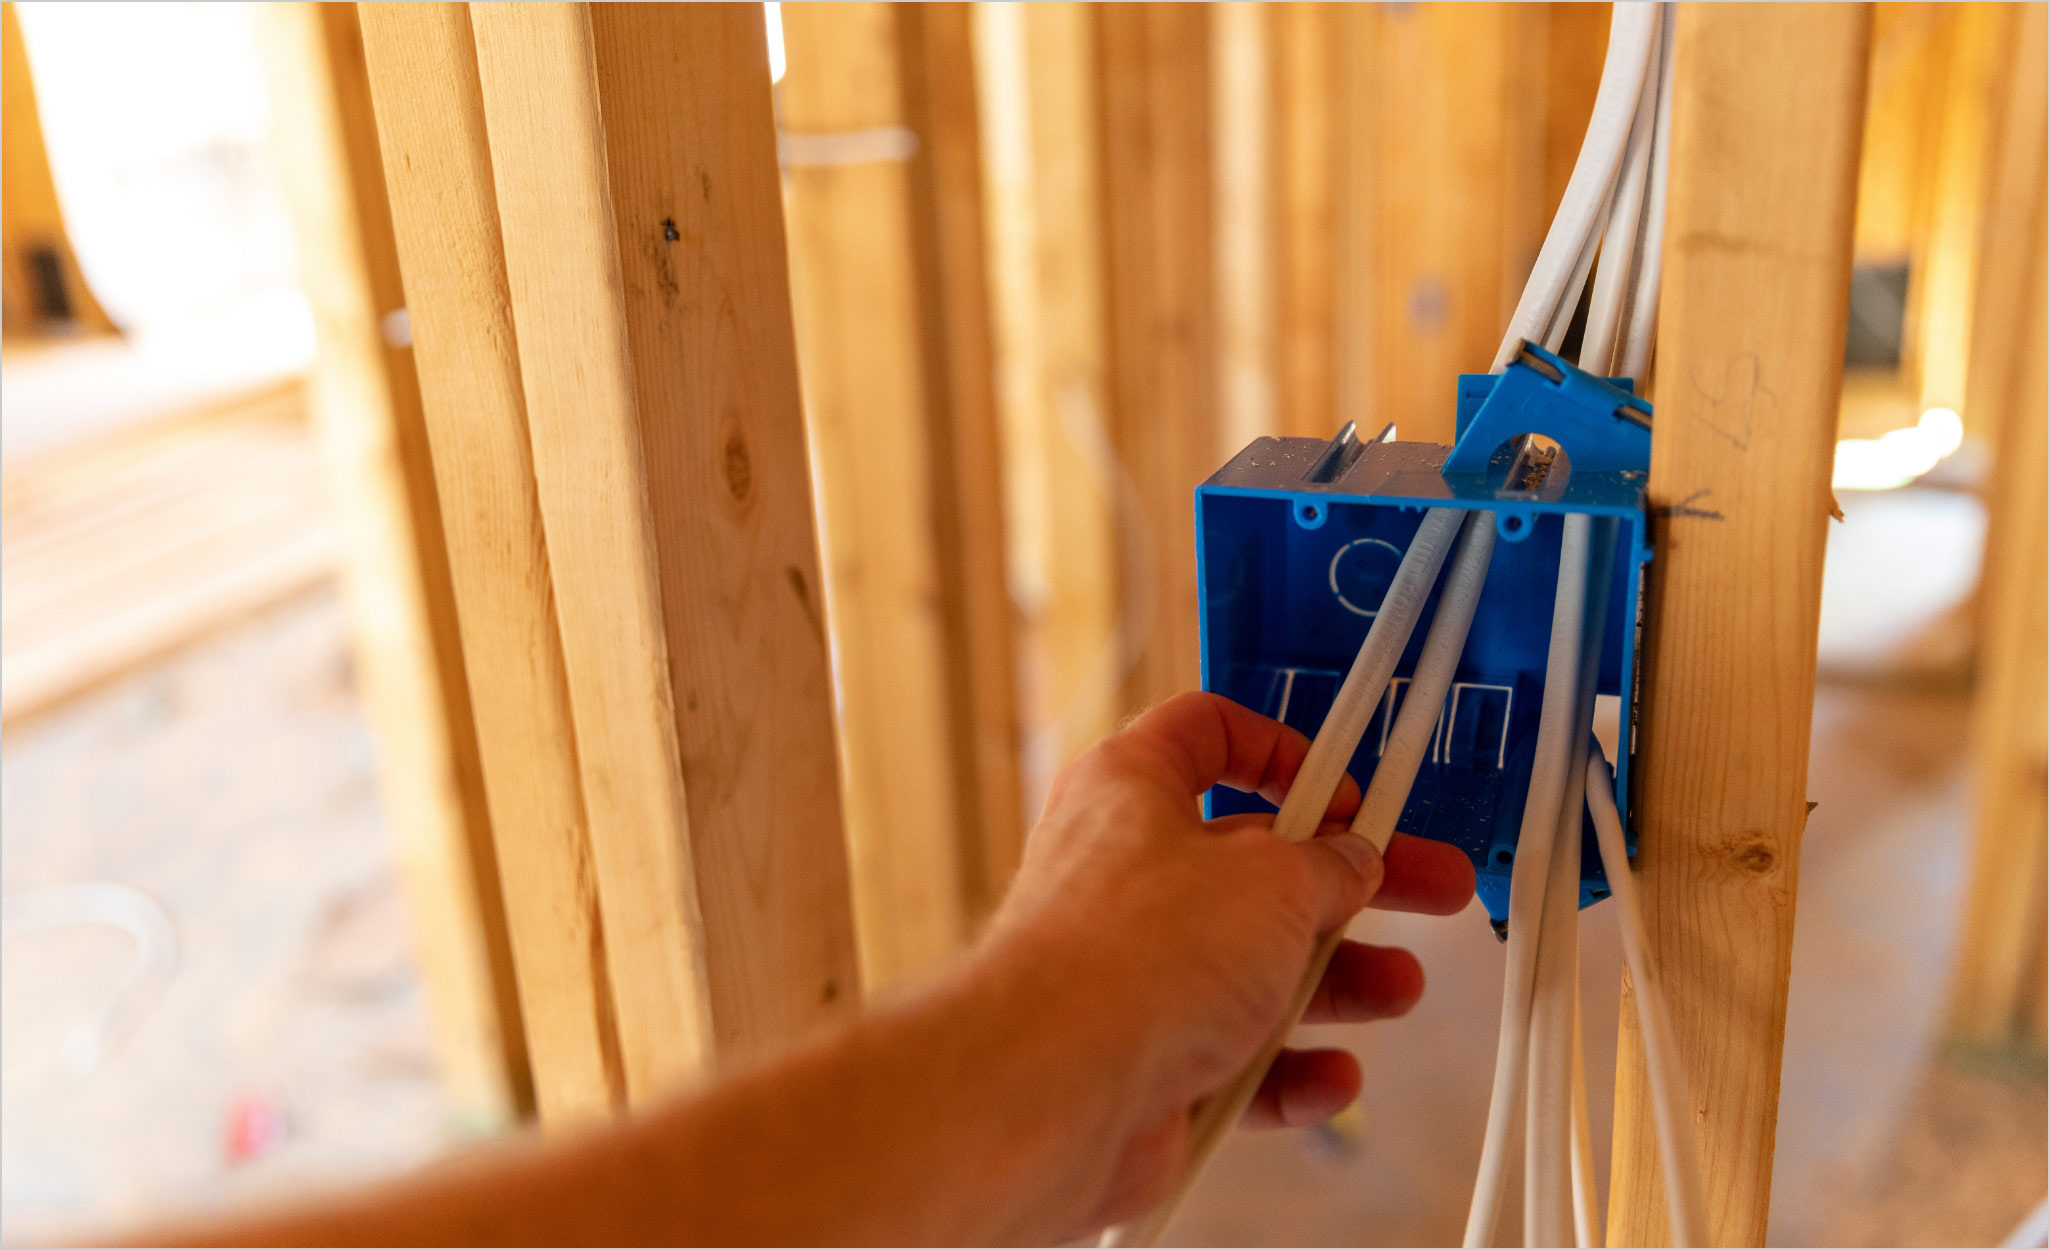 Residential Electrical Code Requirements - The Home Depot